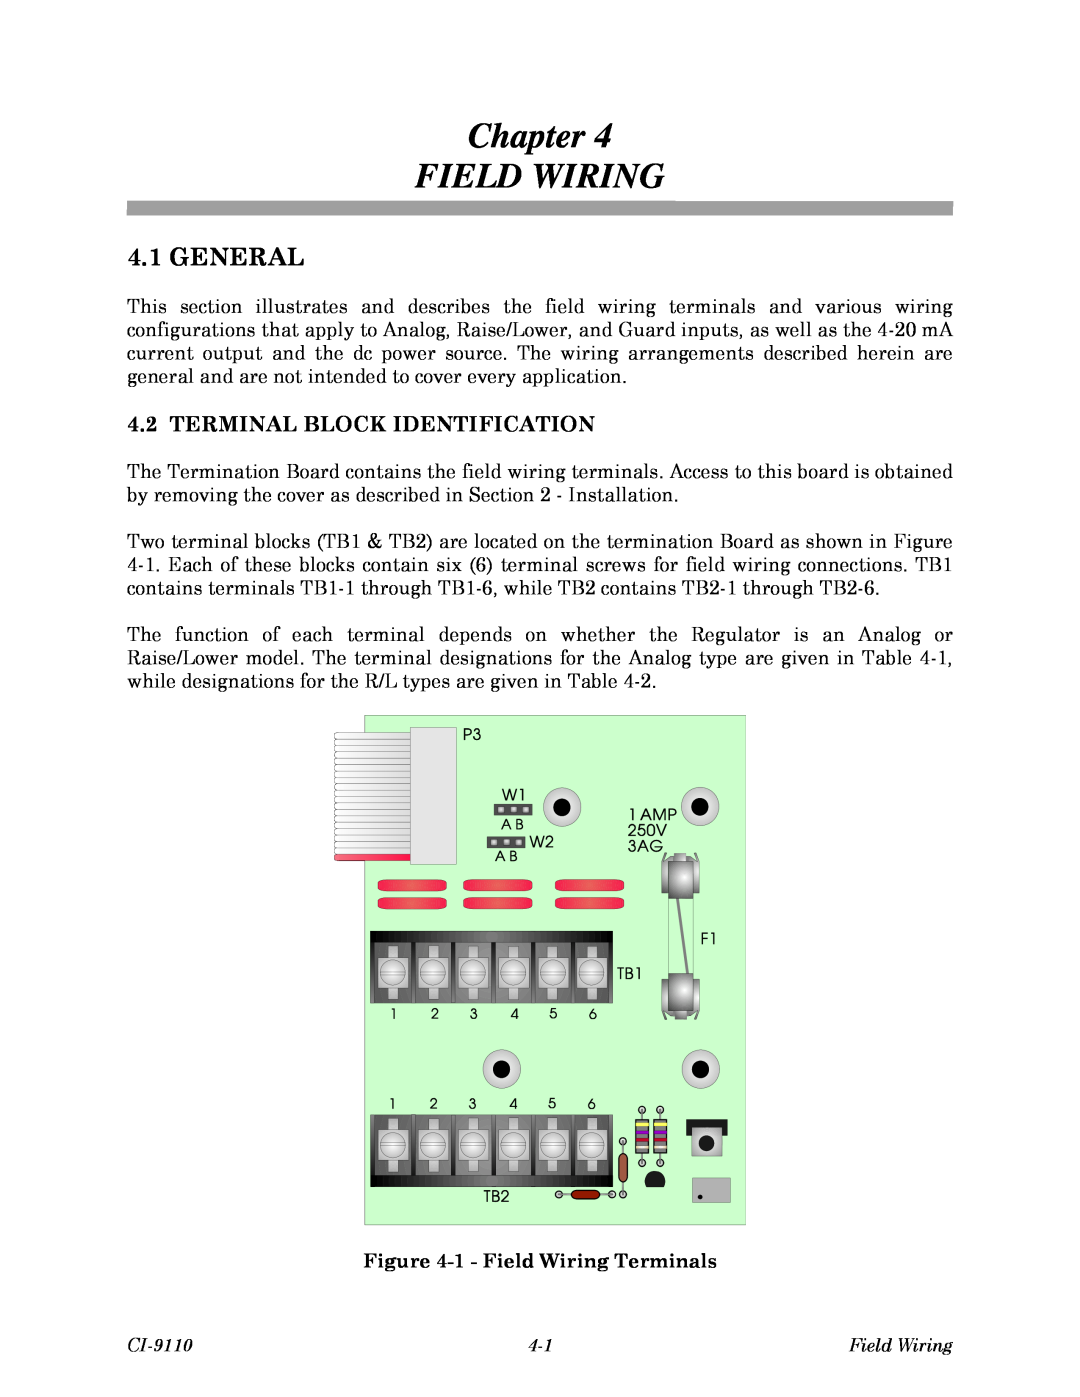 Emerson Process Management Series 9110, CI-9110, 9110-00A Chapter FIELD WIRING, General, Terminal Block Identification 